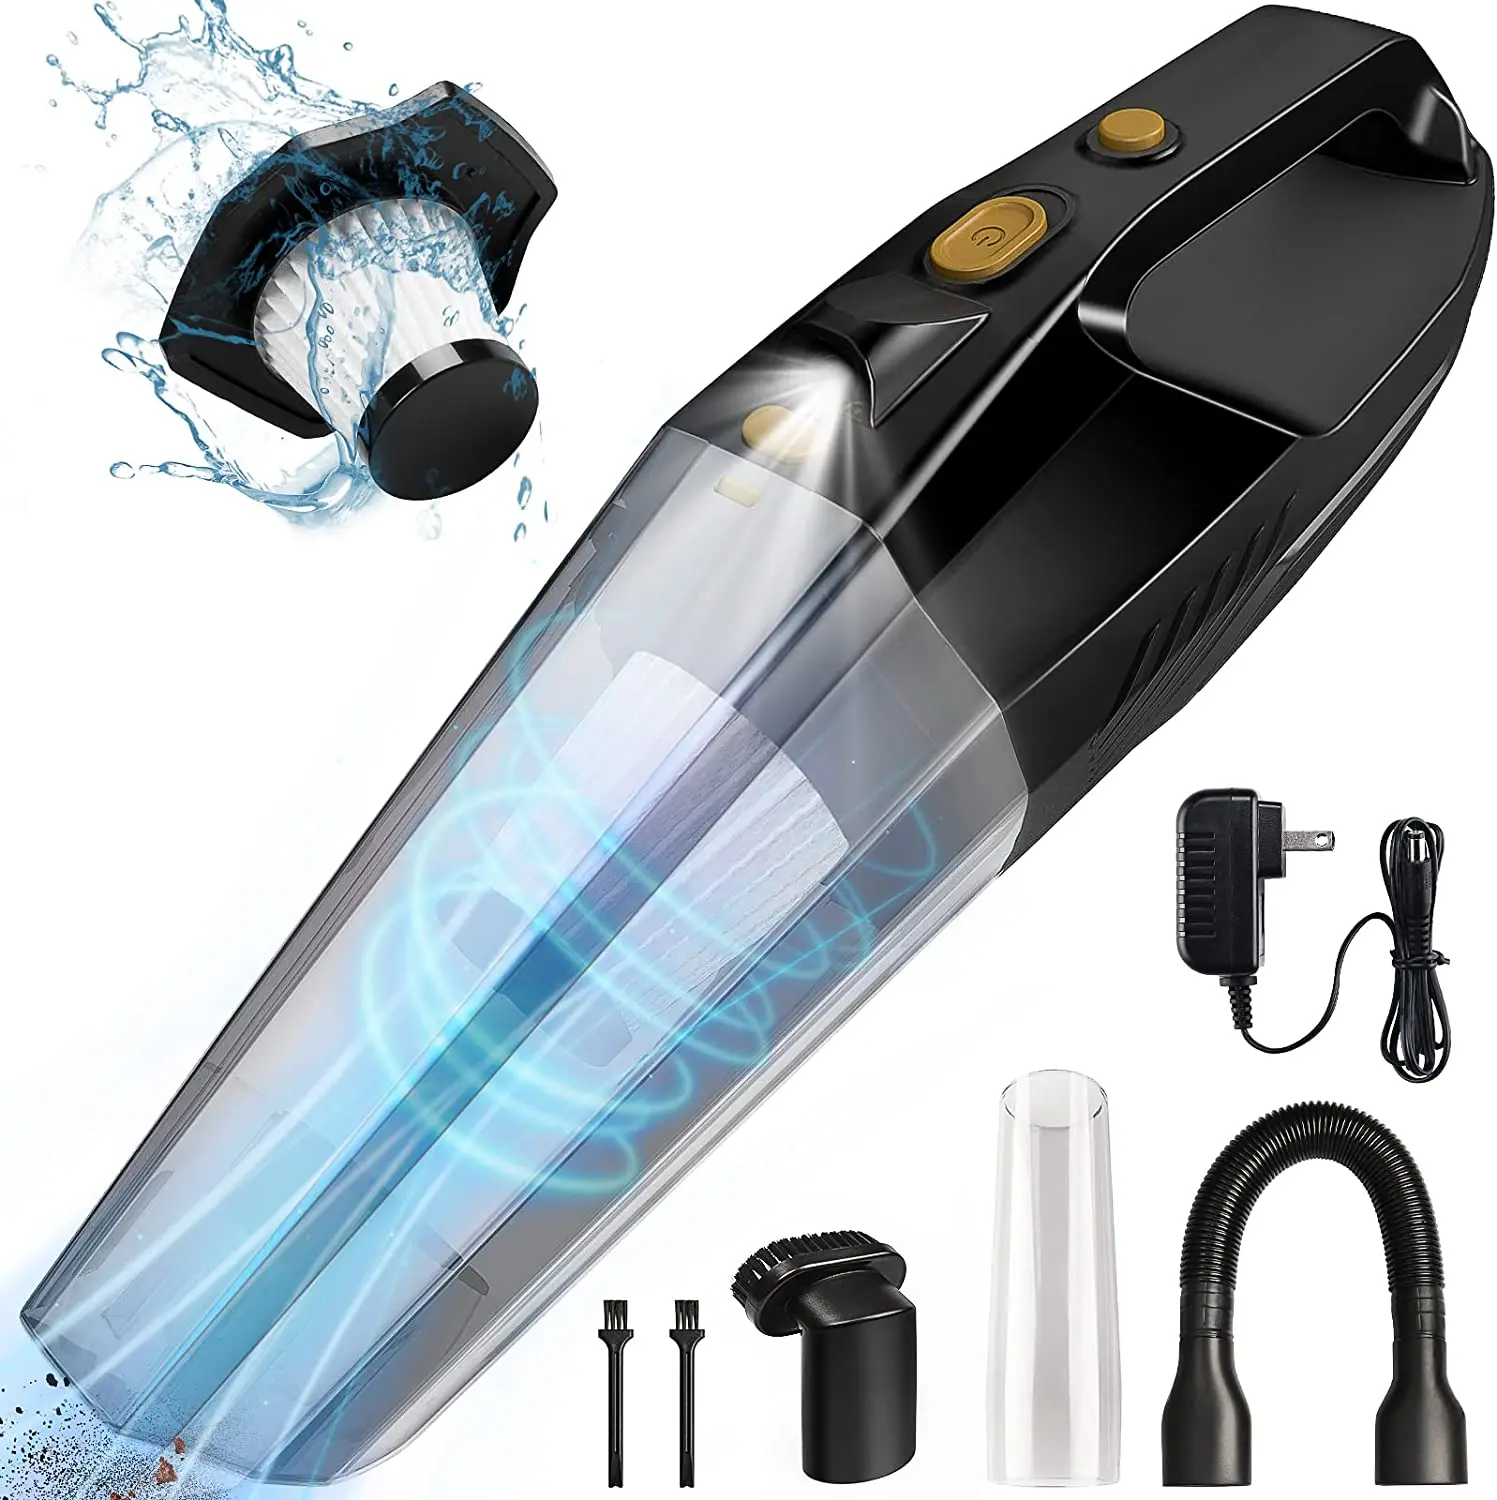 Car Vacuum Cleaner Cordless-Handheld Vacuum Rechargable, Led Light, Wet-Dry Use Portable Car Vacuum for Vehicle Home Office